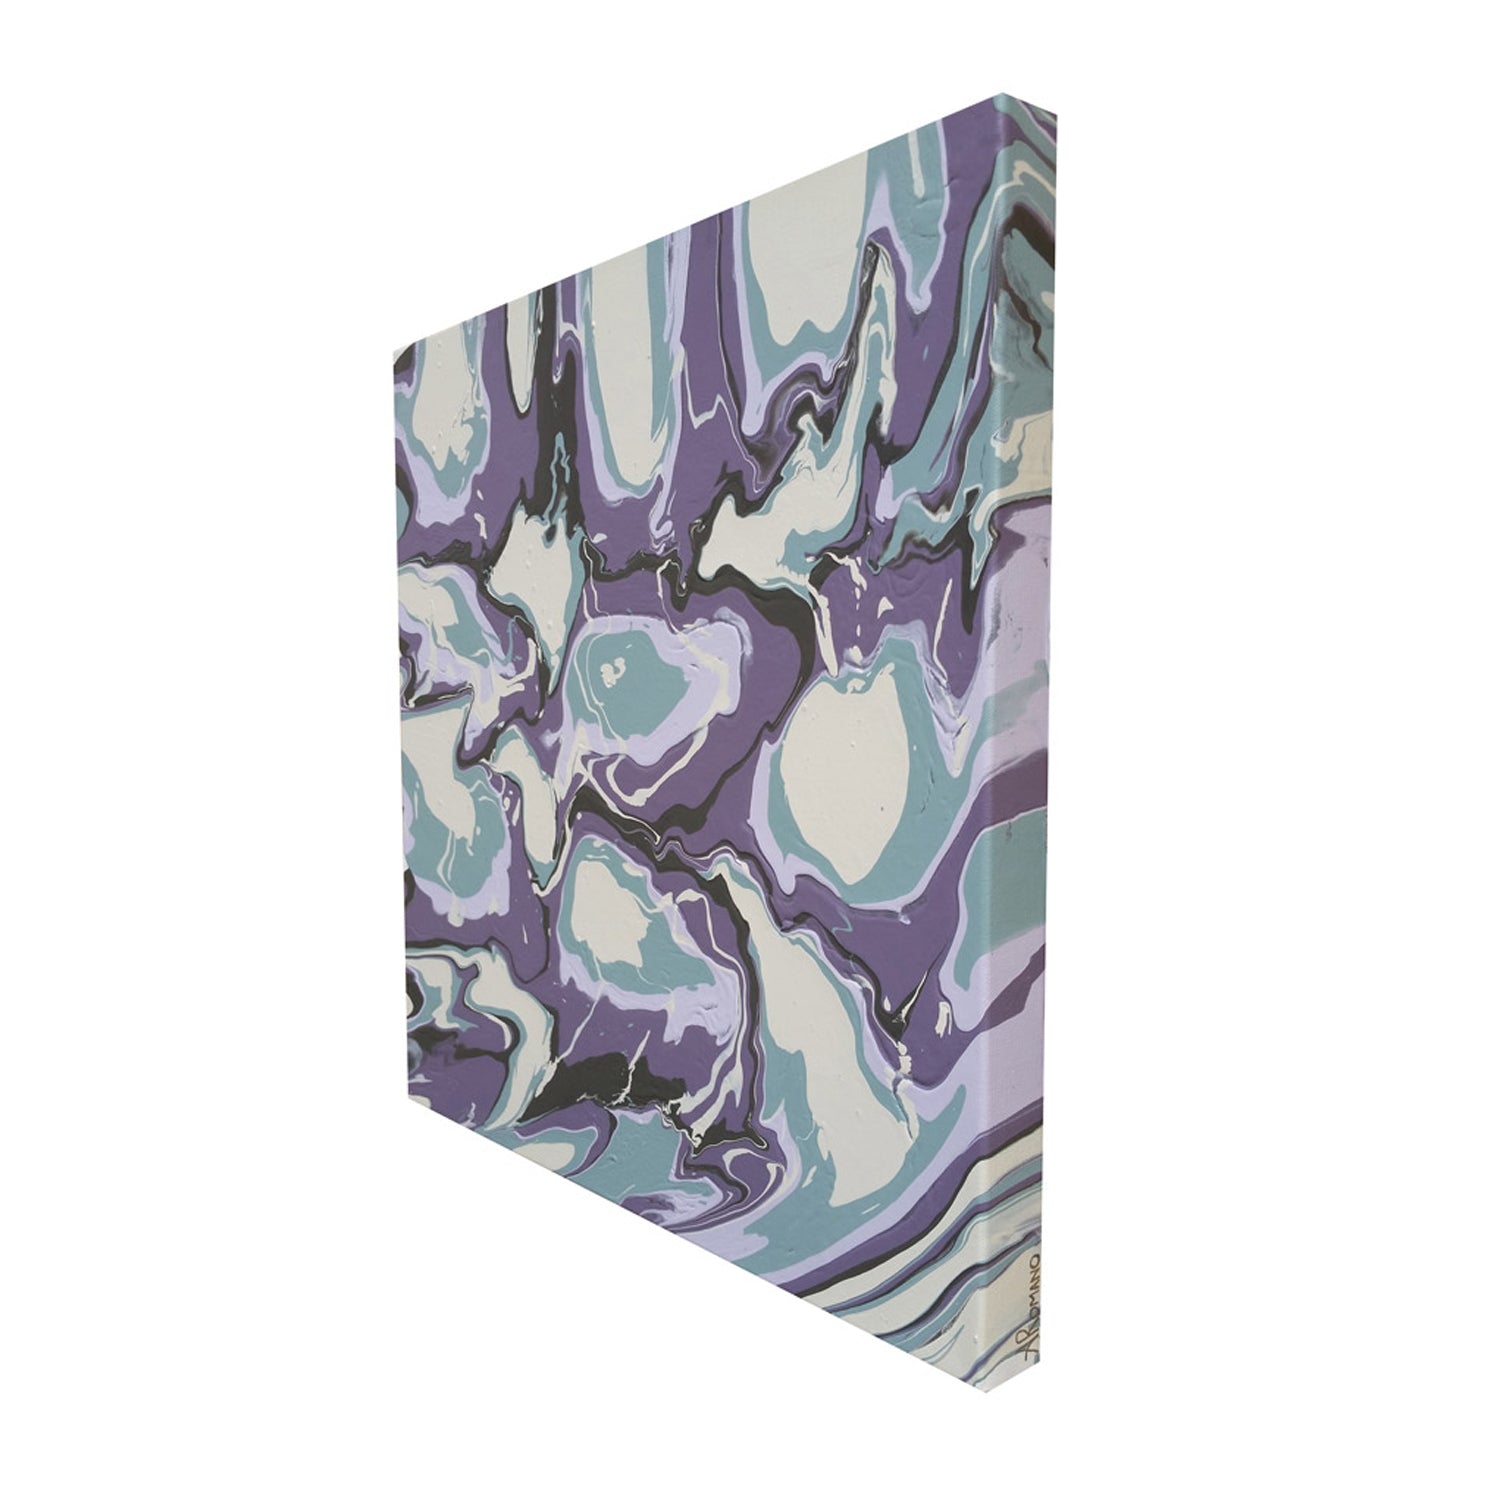 Abstract-Expressionism-Art-Fluid-Painting-Modern-Camouflage-Pattern-Purple-Green-White-Sides-Painted